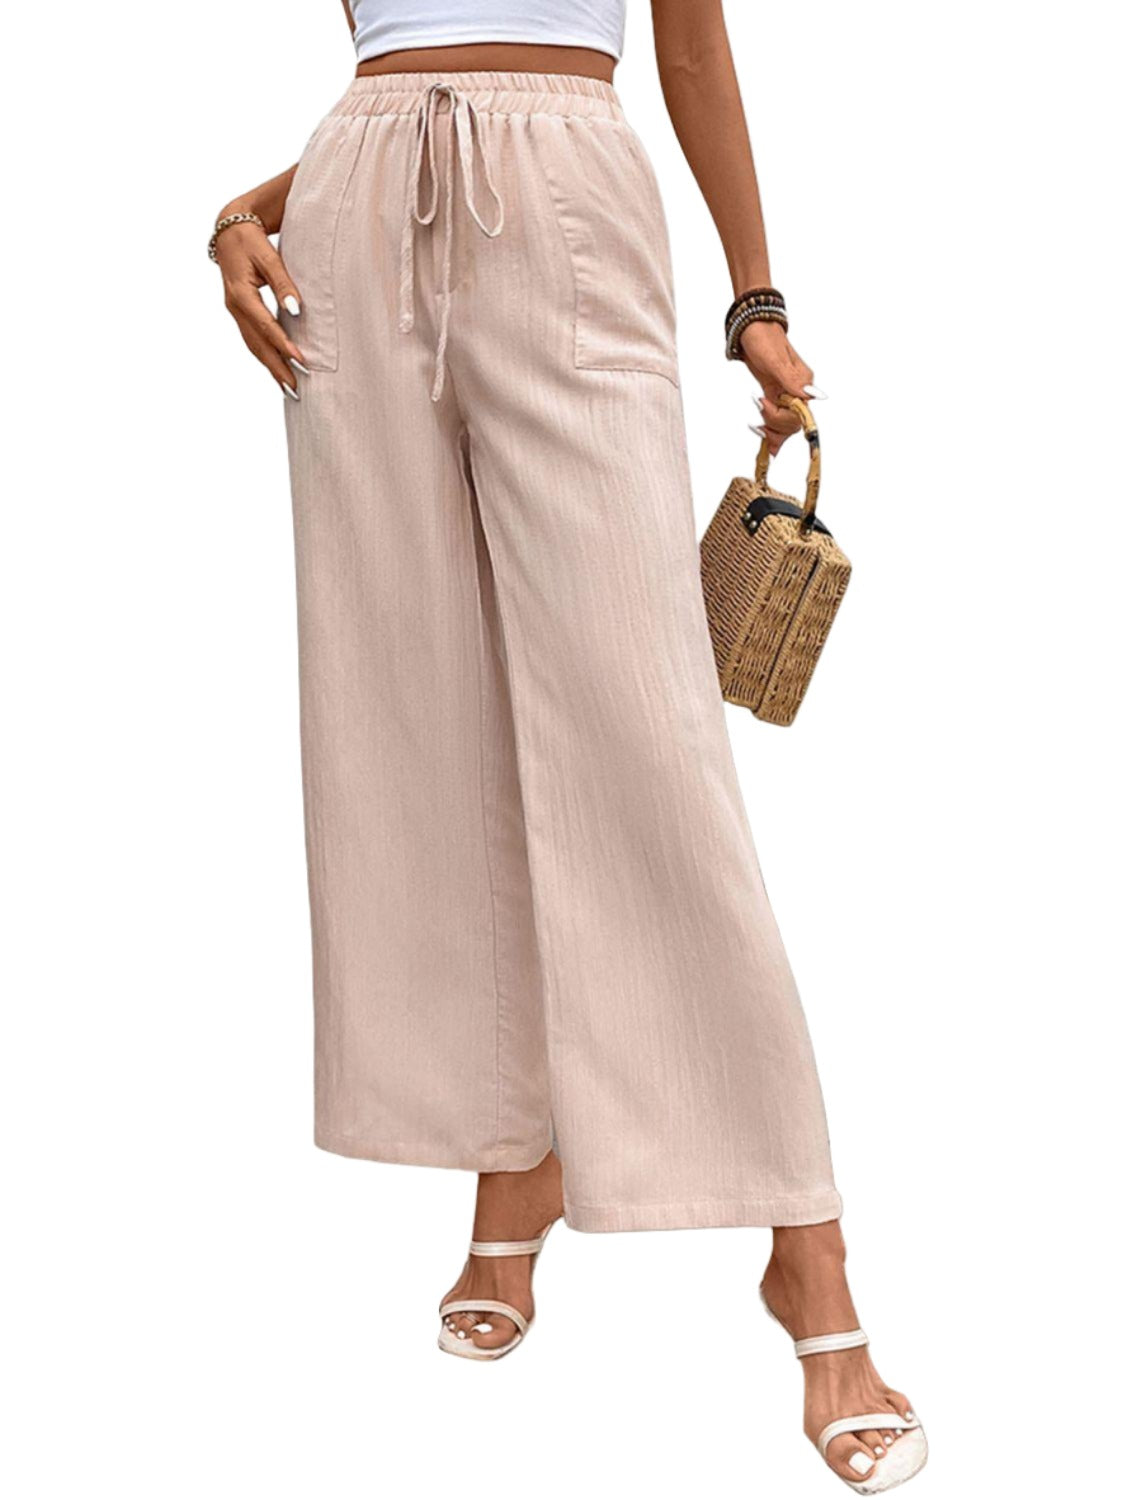 Women's Pants Tied Wide Leg Pants with Pockets